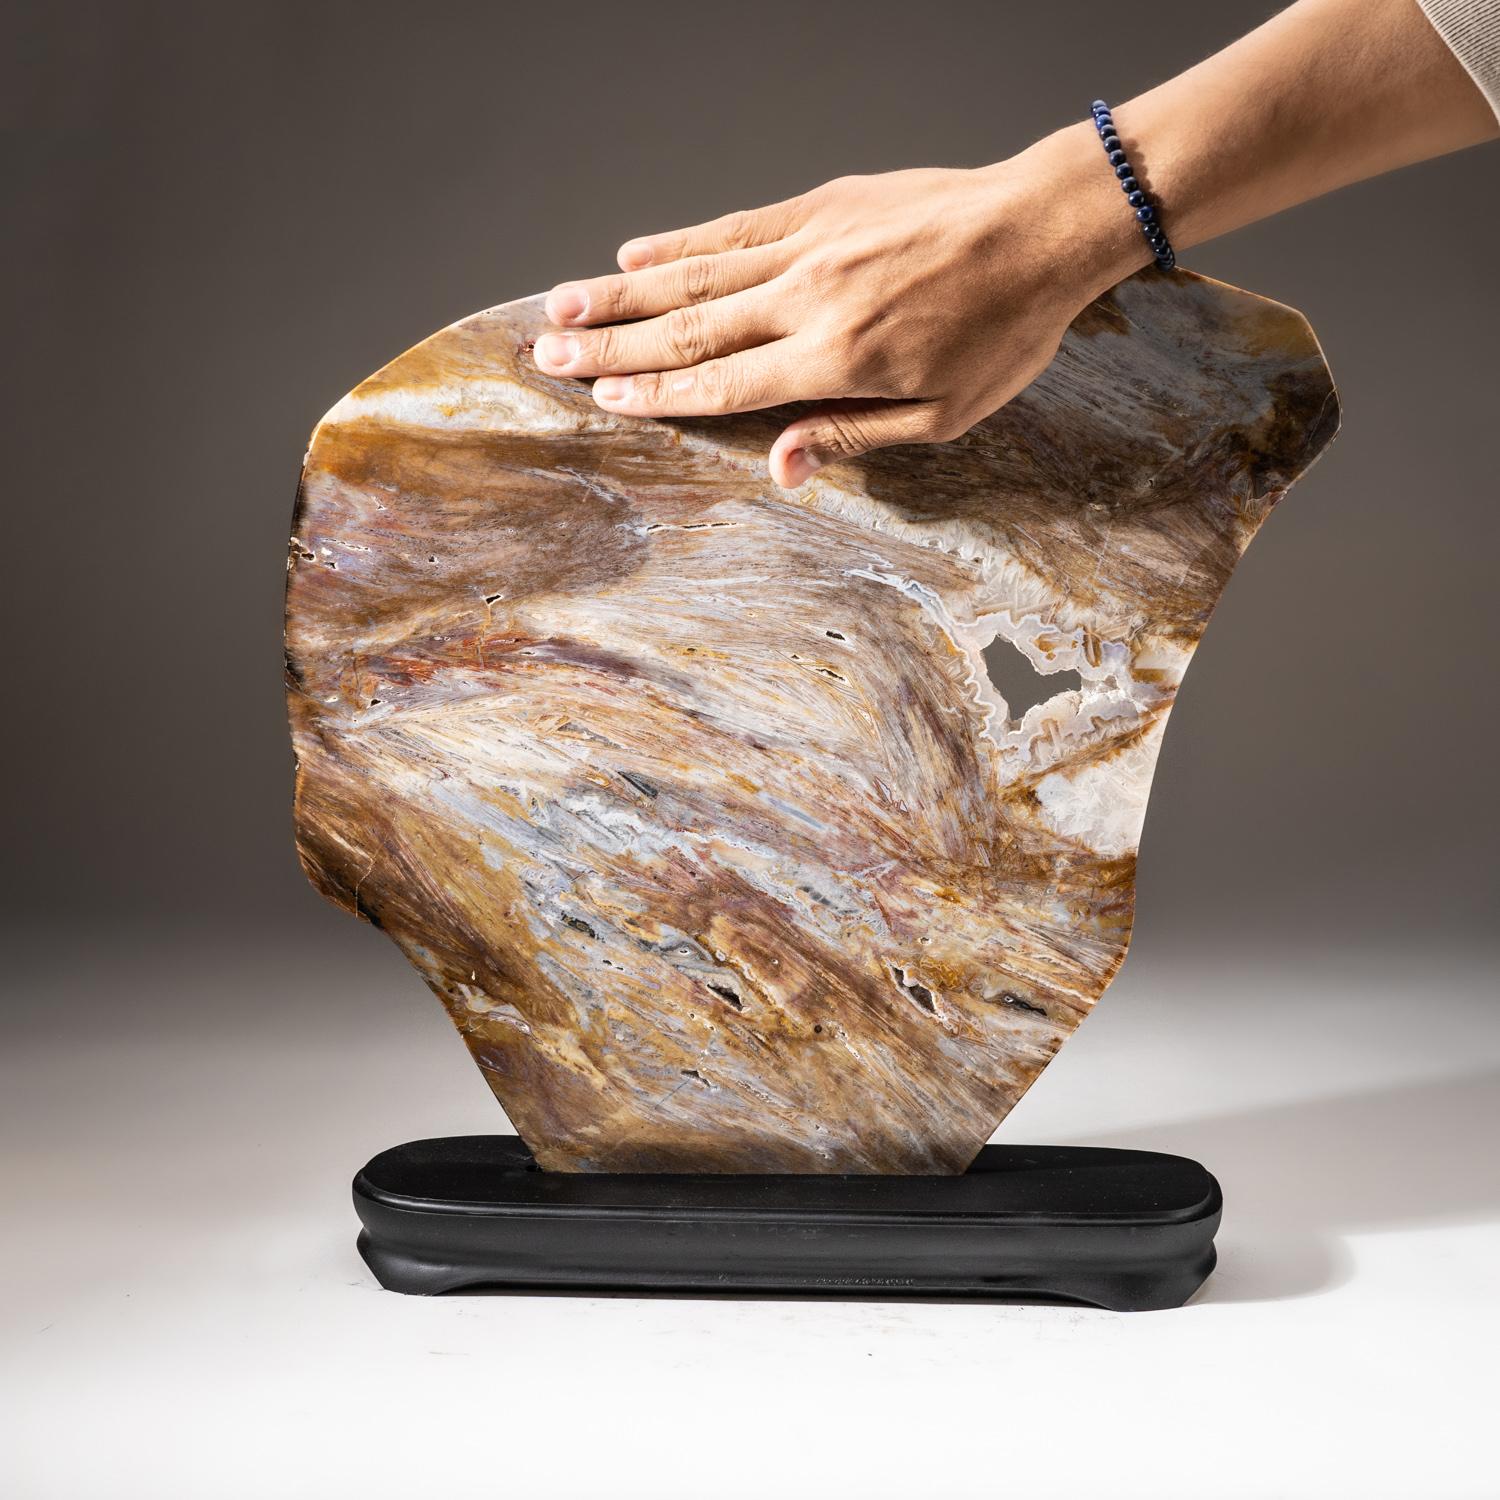 Top quality, Brazilian natural agate freeform slice in a custom black wooden frame. This piece polished on both sides, untreated and displays beautiful natural wavy patterns ranging in all earthtone colors - yellow, white quartz and brown.

Agates